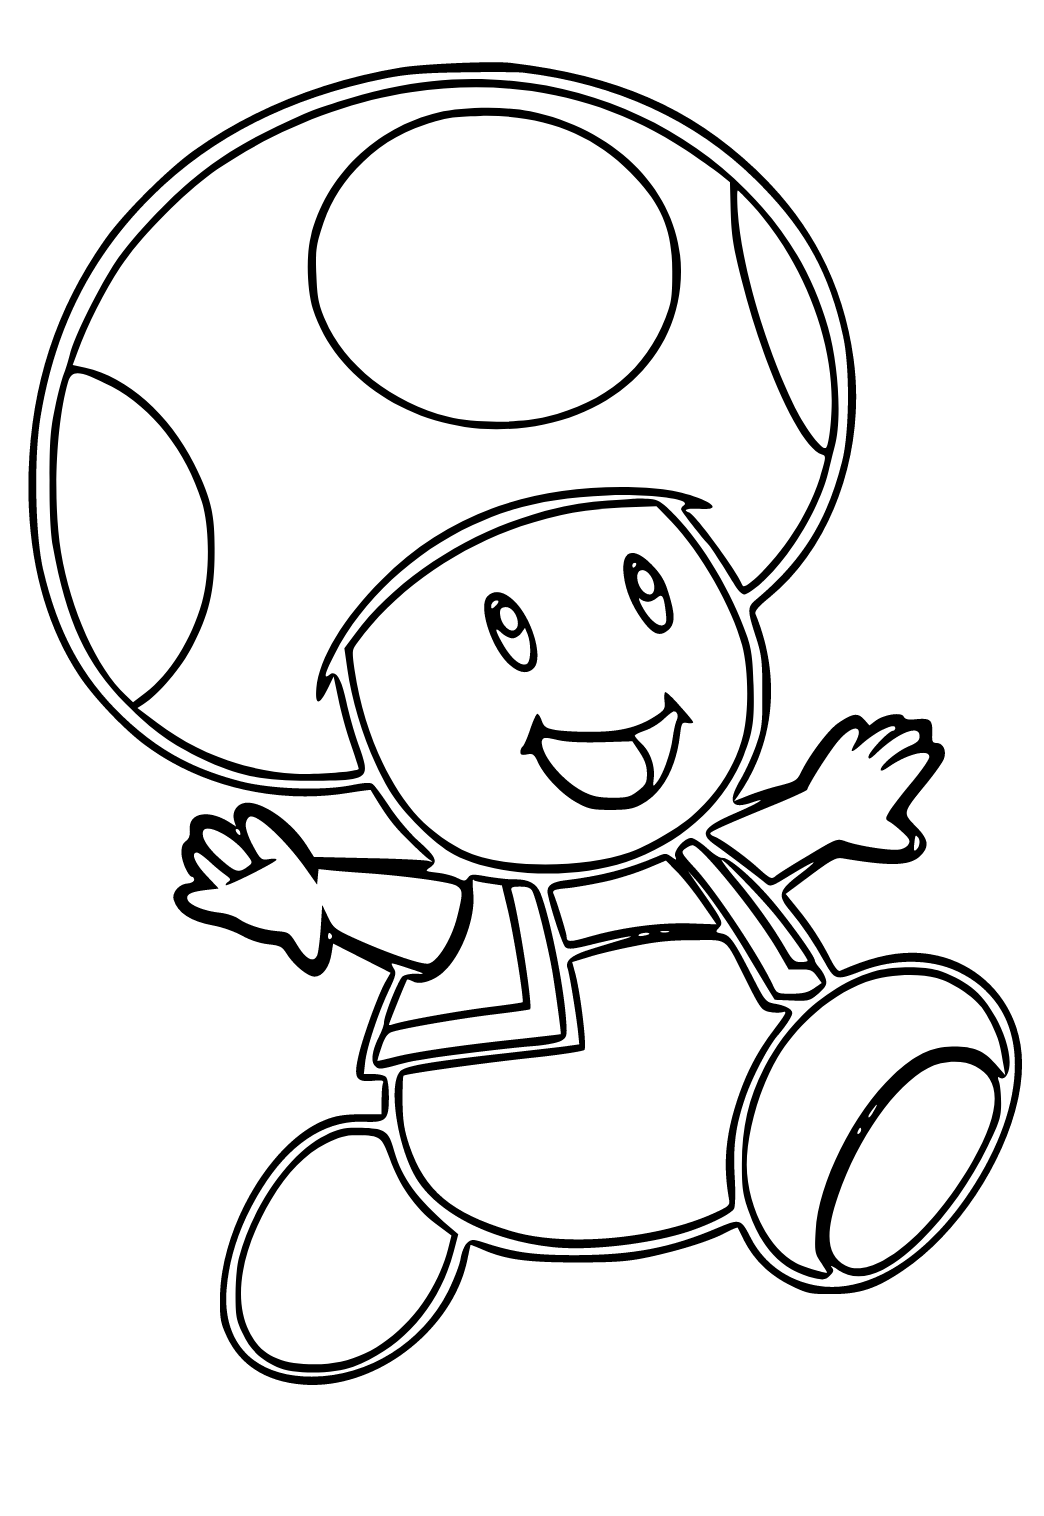 Free Printable Super Mario Mushroom Coloring Page, Sheet and Picture for  Adults and Kids (Girls and Boys) - Babeled.com